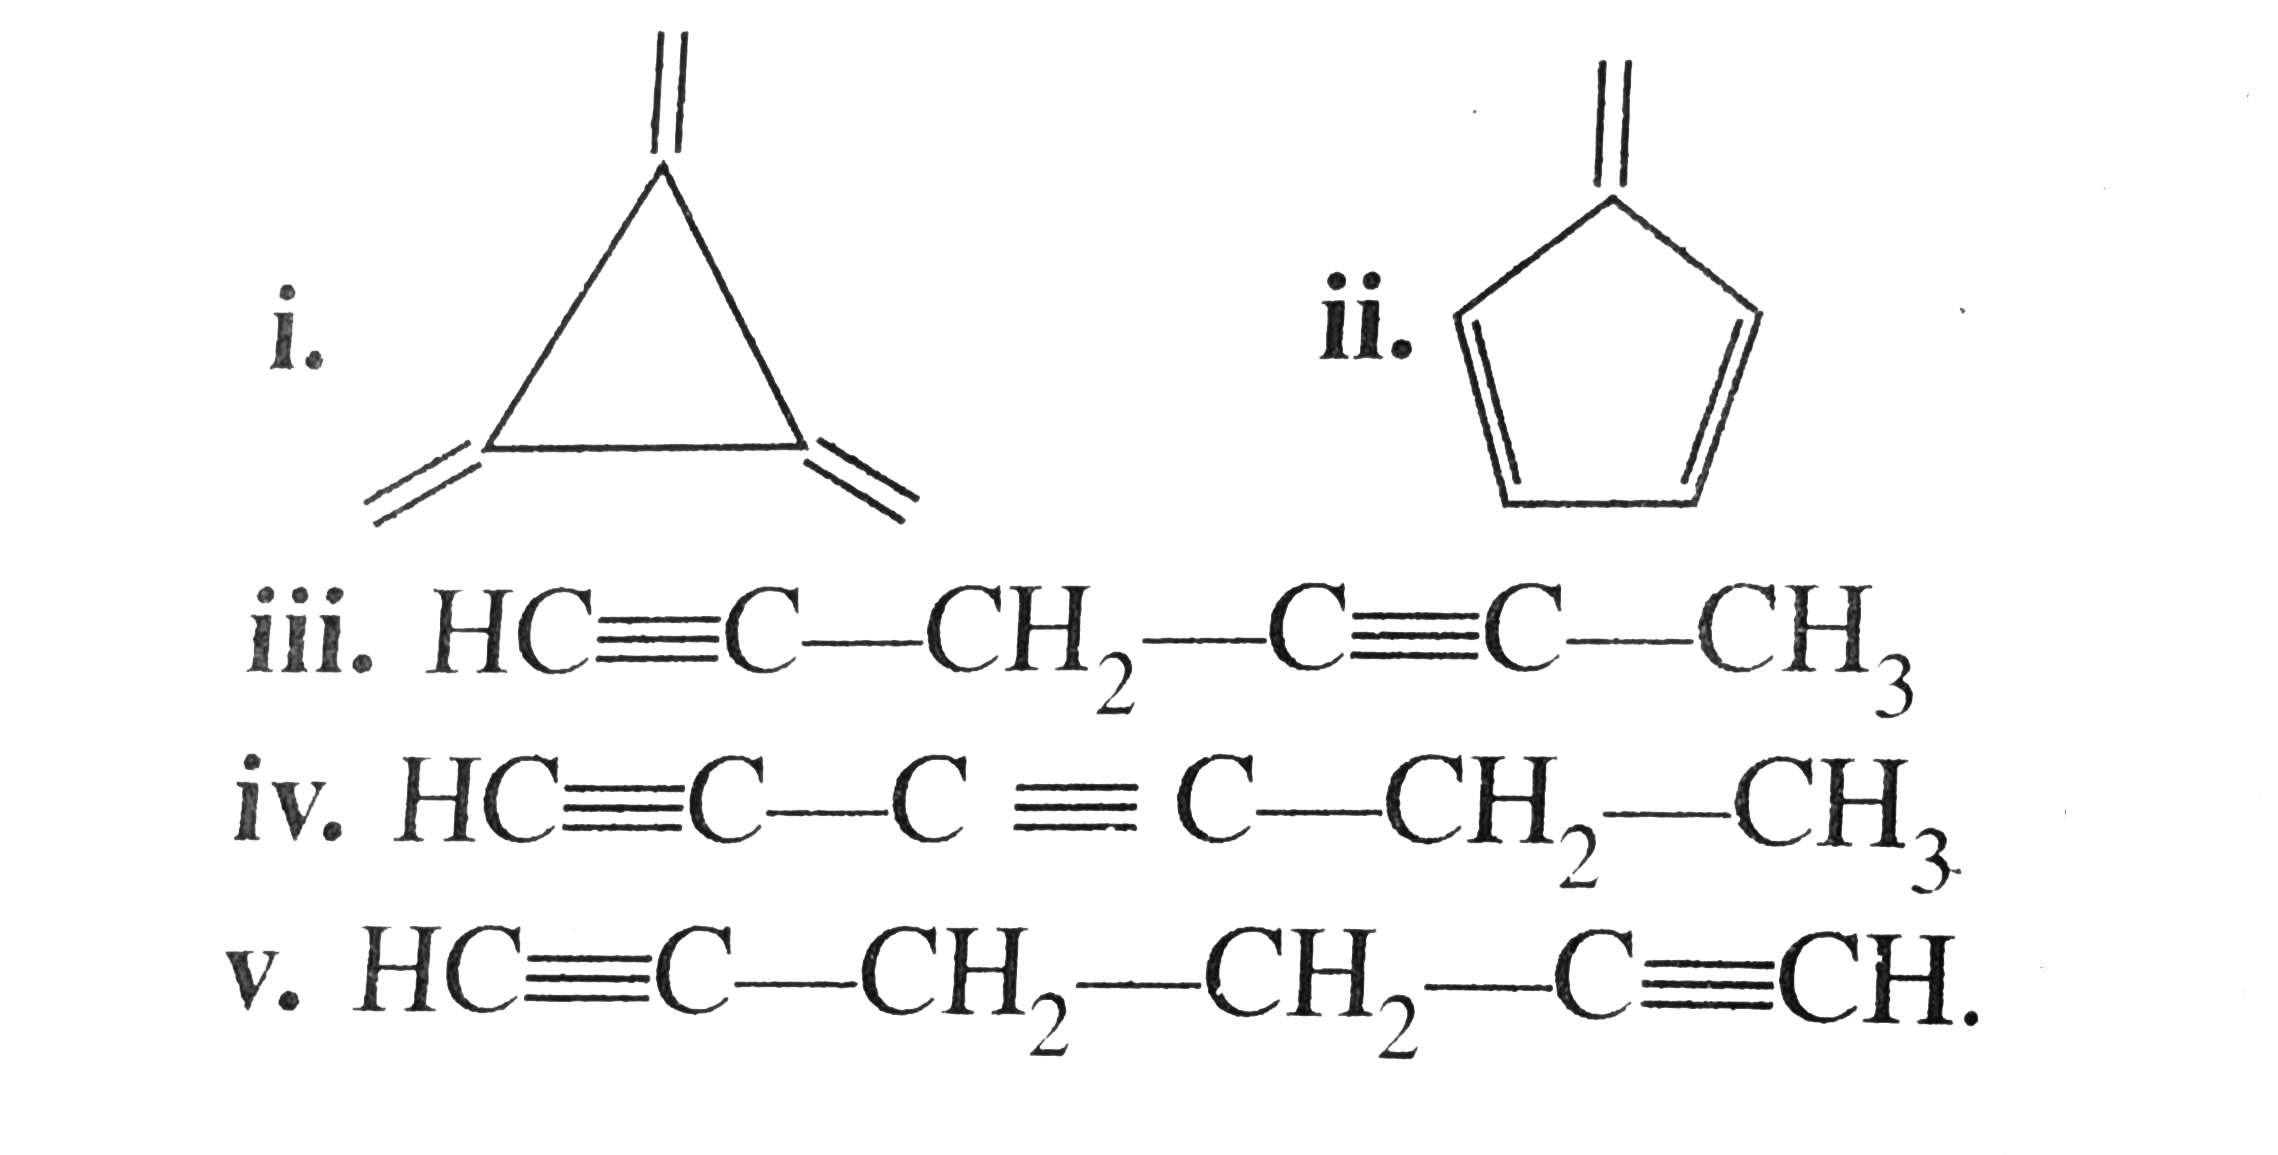 Some alternate strucres proposed for benzene are given. Indicate for each of them how many (i) mono and (ii) di-substuted products are possible. Which  structures fits in the  isomer number observed  for benzen?    iii. HC -= C - CH(2) - C -= C - CH(2)   iv. HC -= C-C -= C - CH(2) - CH(3)    v. HC -= C - CH(2)  - CH(2) - C -= CH.